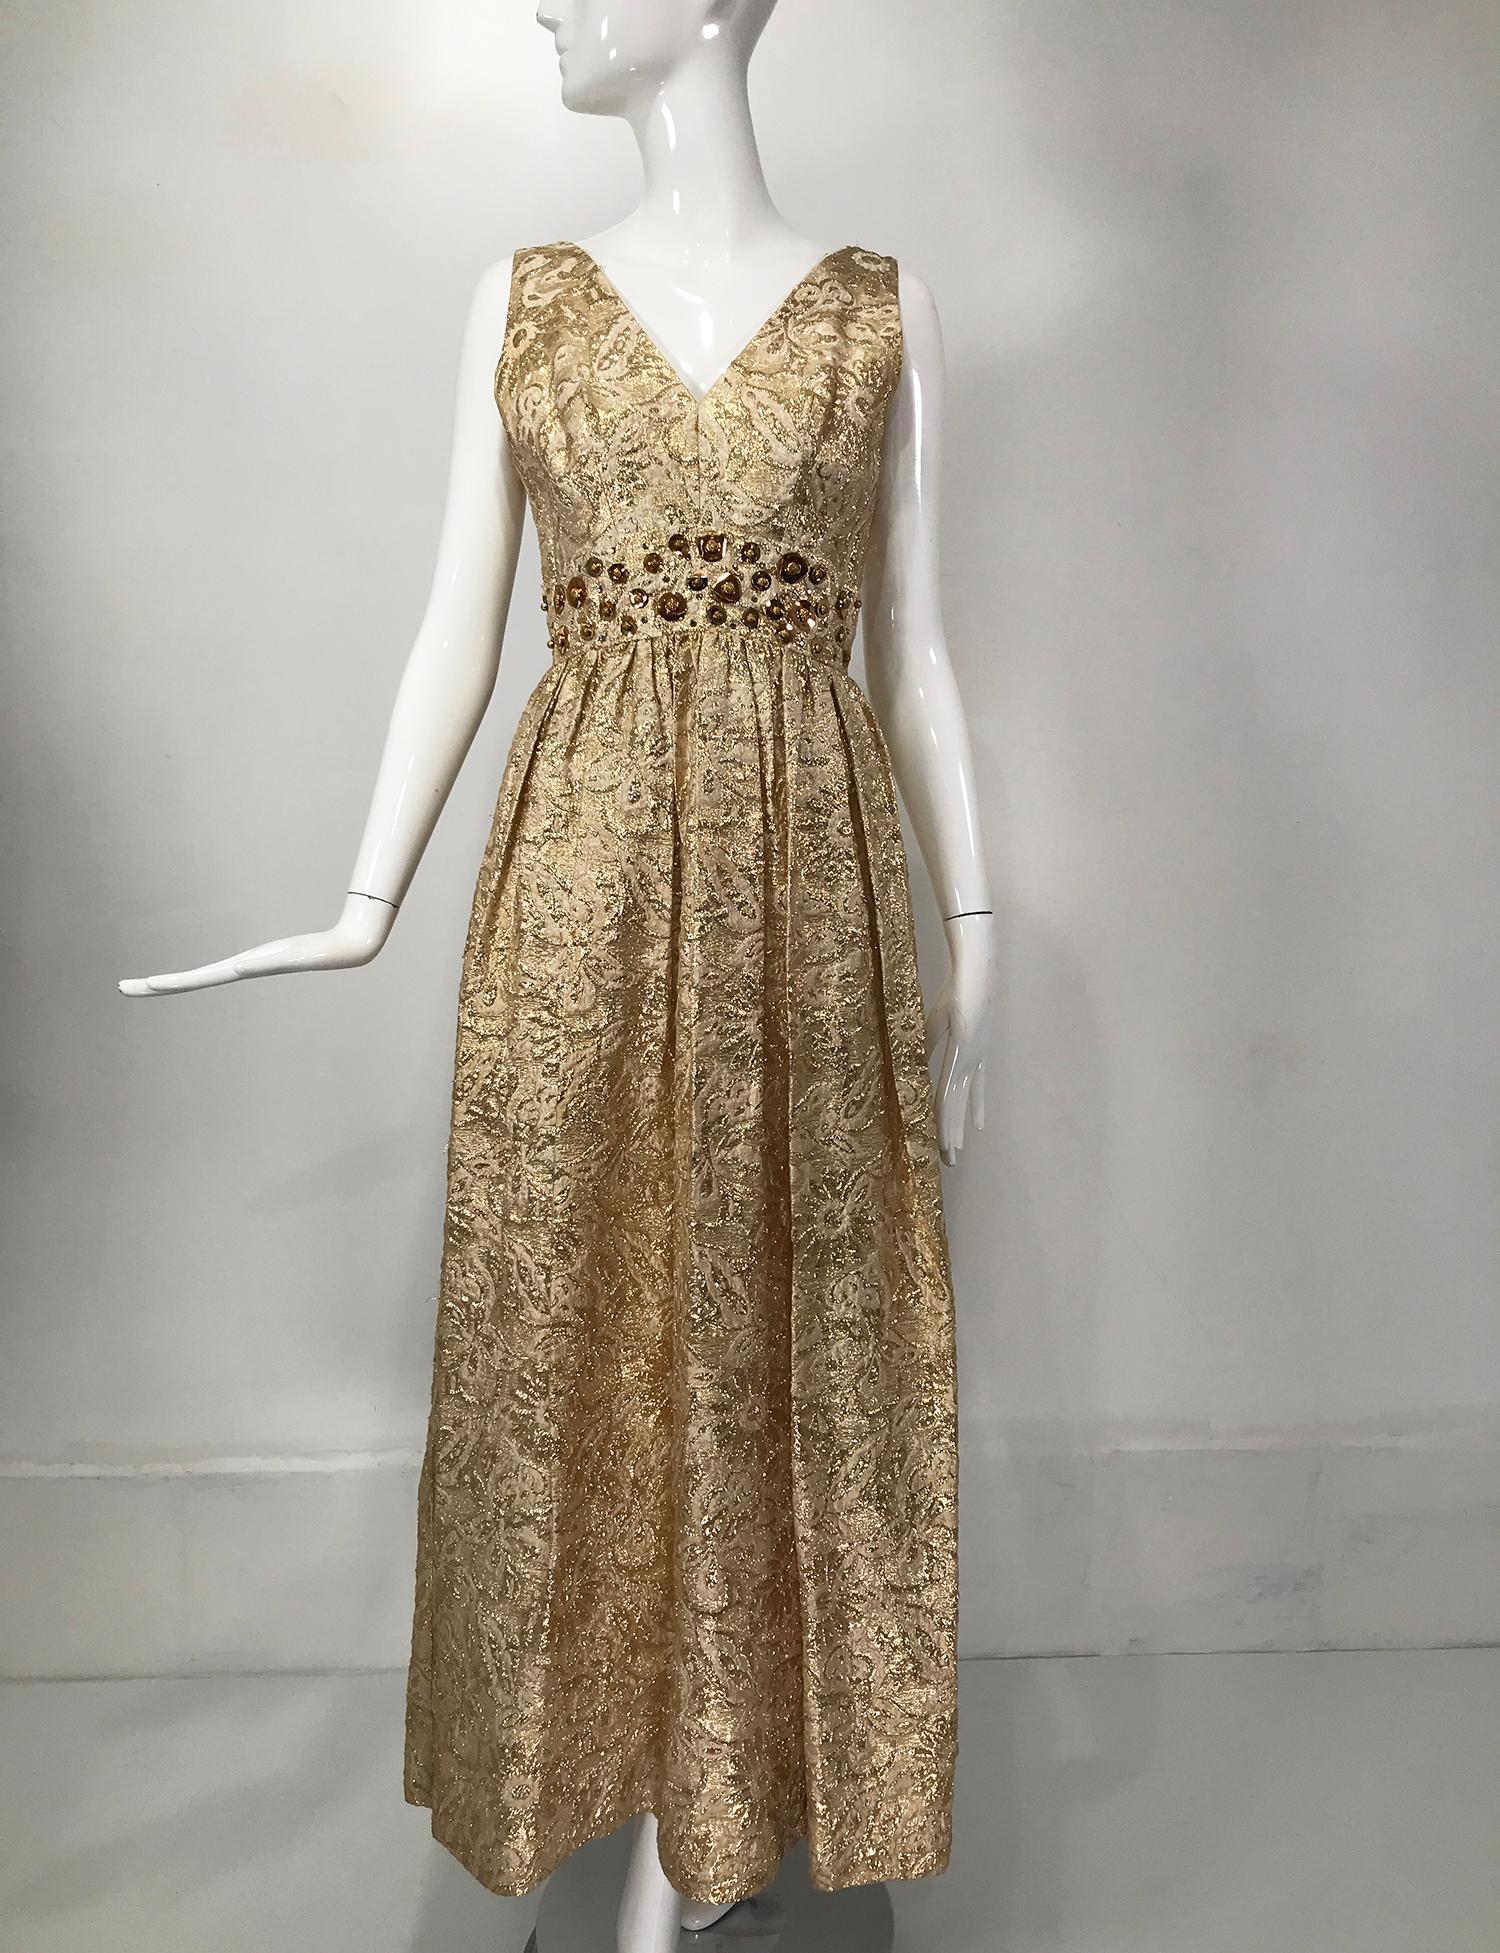 Gold metallic brocade V neck empire maxi dress from the 1970s. Sleeveless dress has a V neckline, an empire waist is sewn with large gold sequins and beads, the skirt is lightly gathered below the bust and falls full to the hem. The dress is lined,